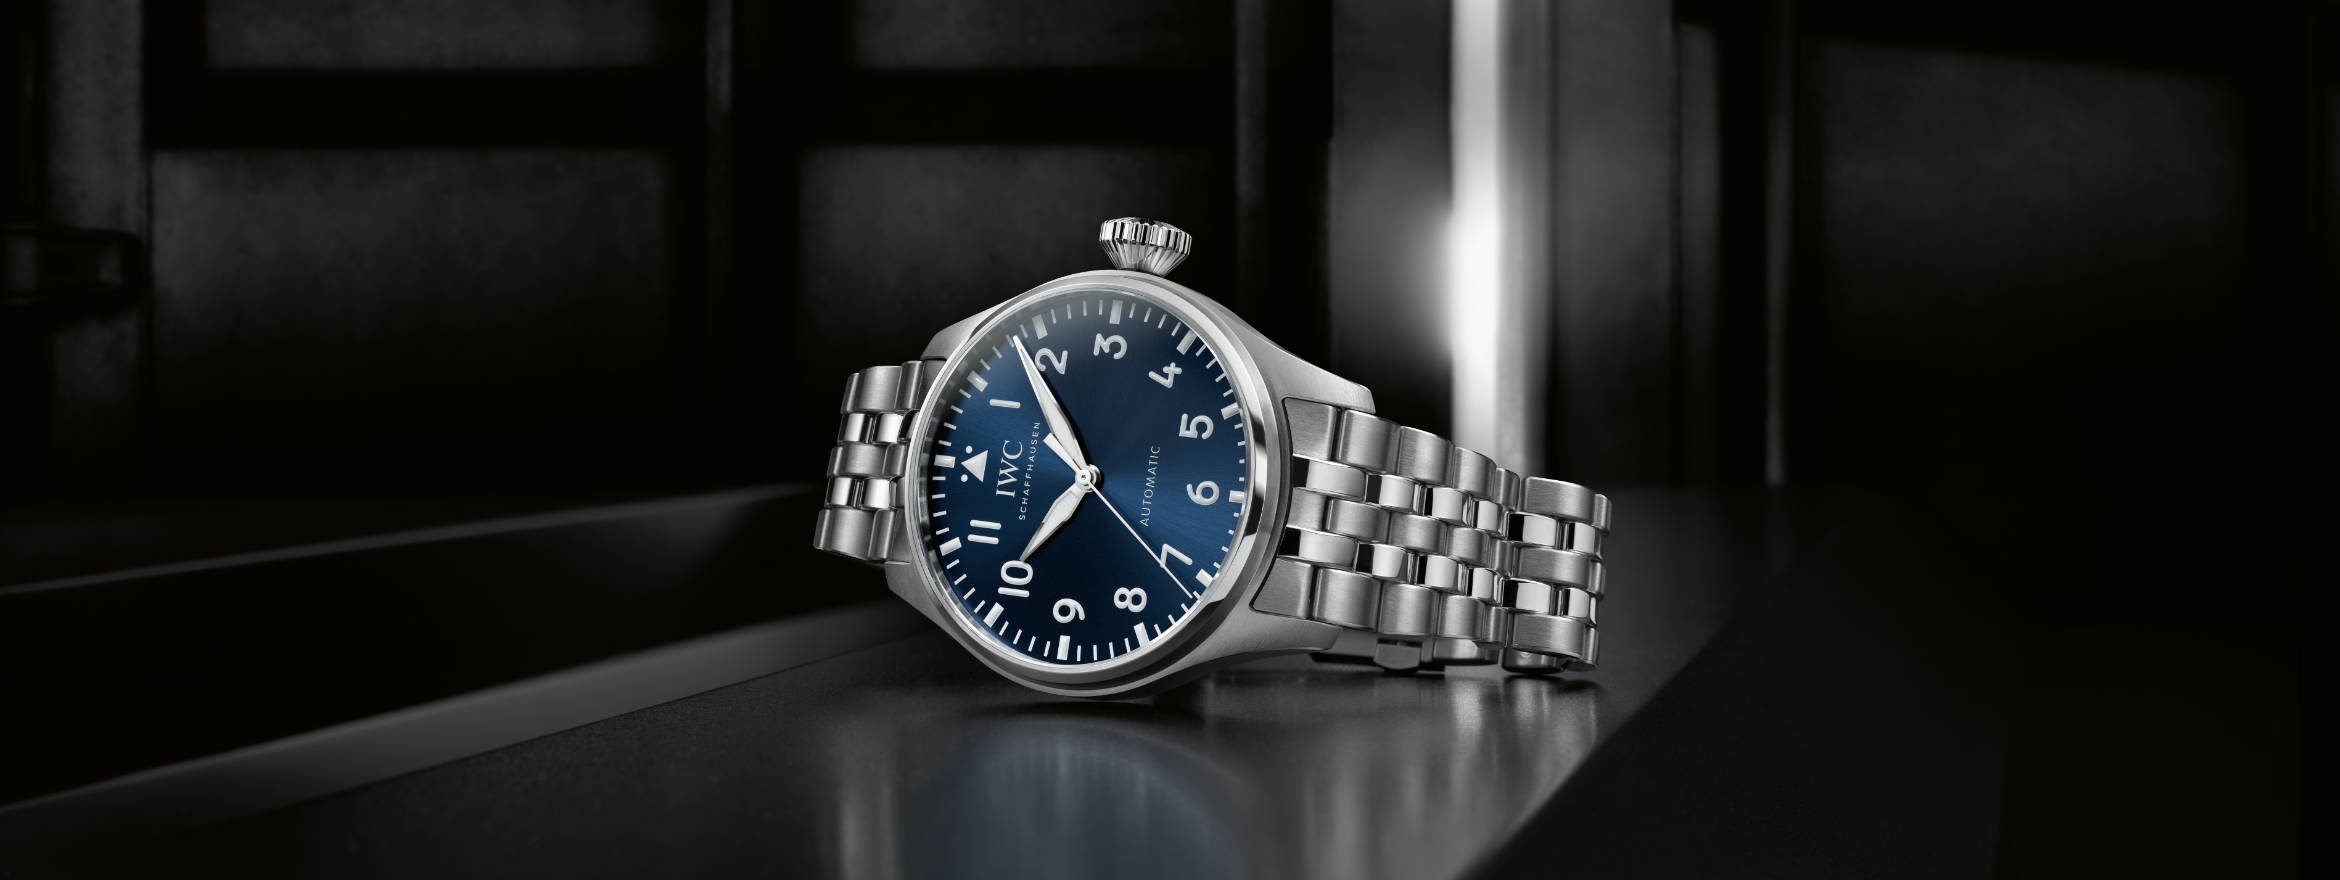 IWC Launches App With Virtual Watch Try-On